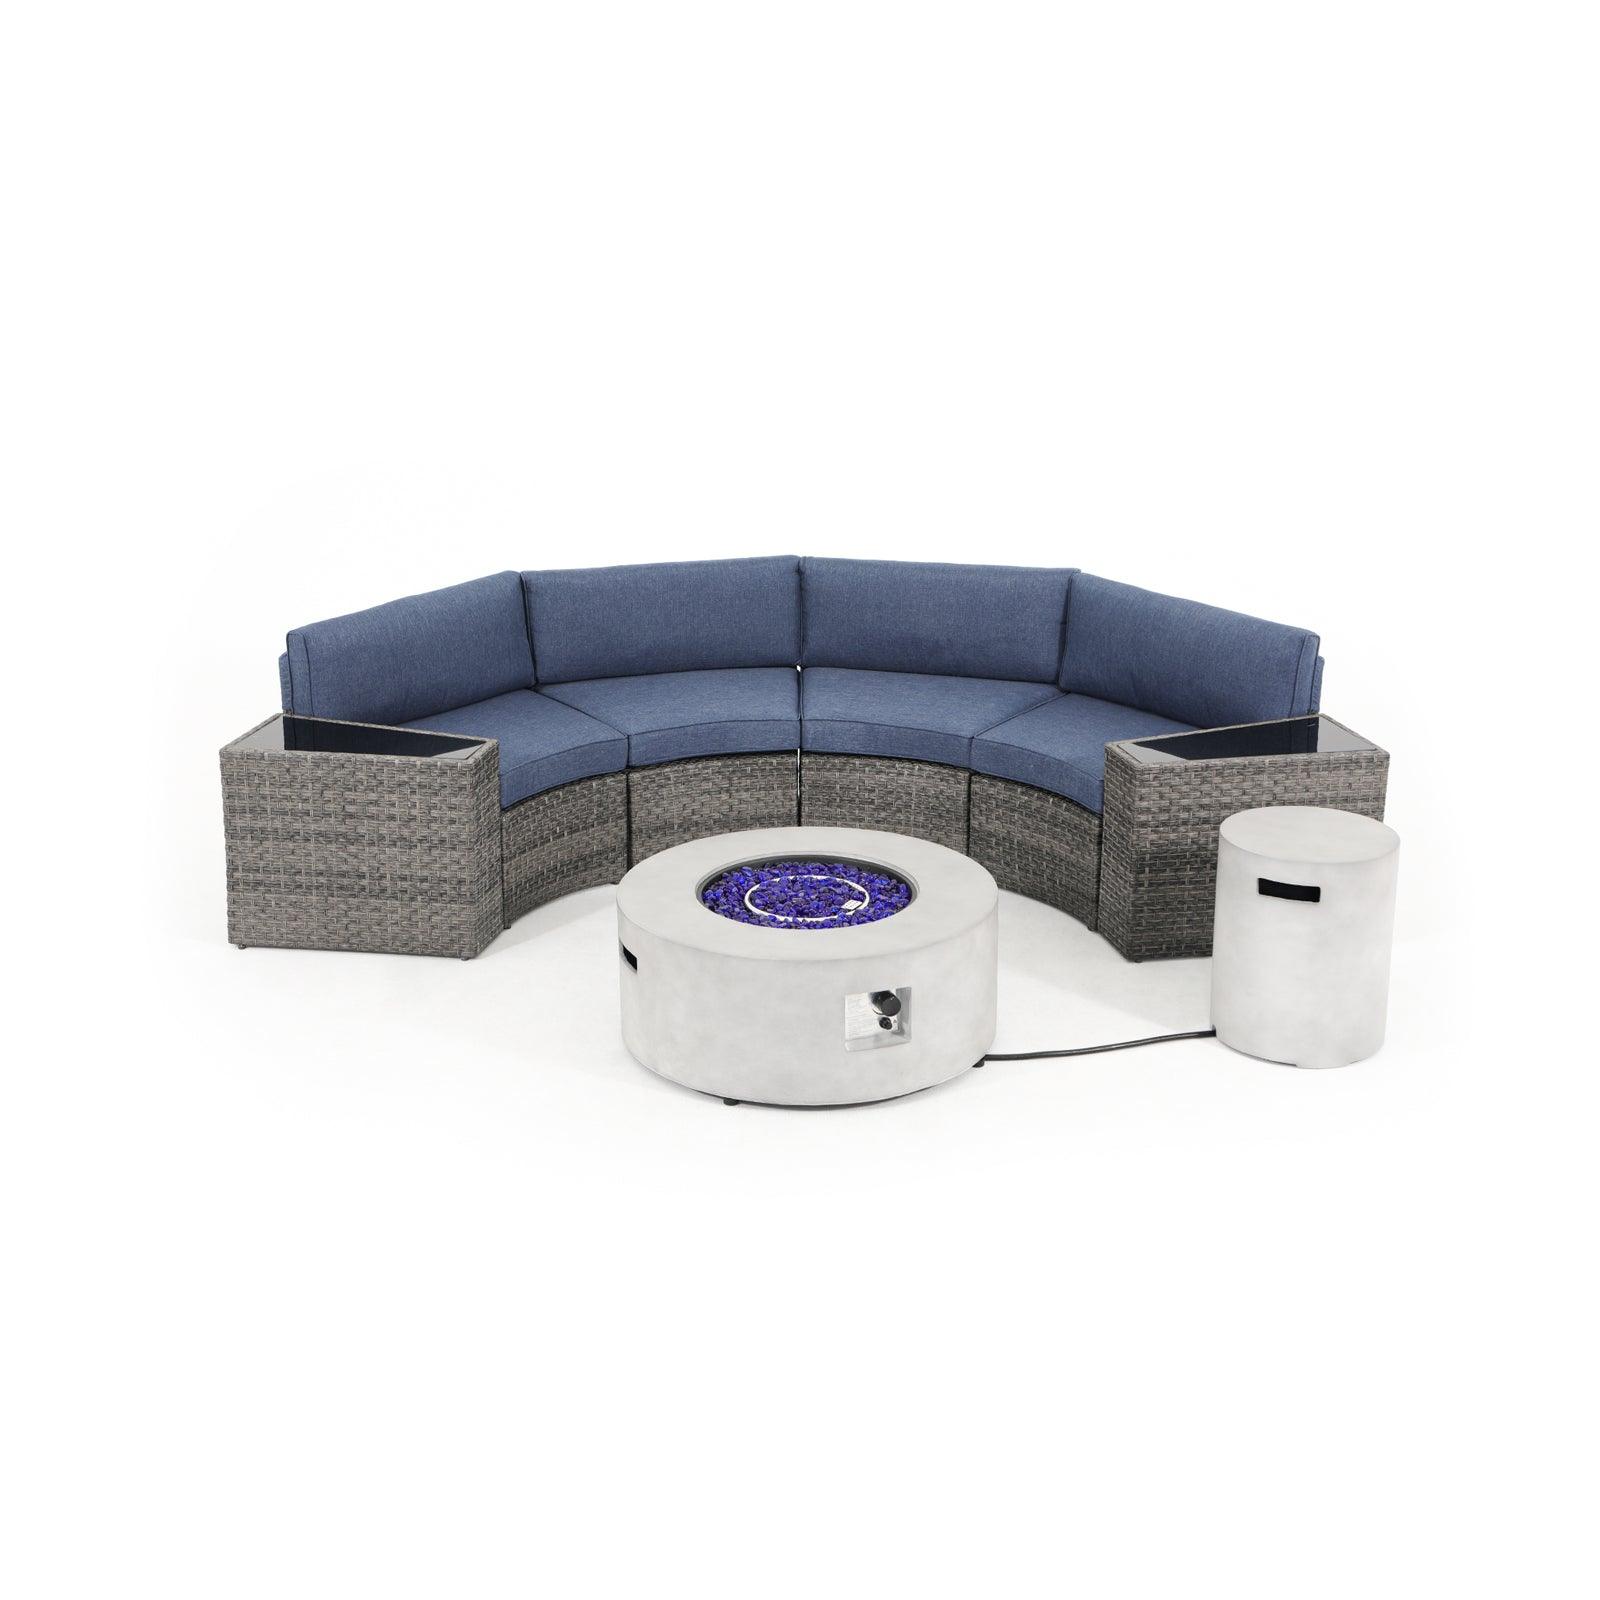 Boboli 4-seater Grey Wicker Curved Sectional sofas with navy blue cushions +2 side tables + 1 grey Propane Fire Pit with tank holder, front view- Jardina Furniture#color_Navy Blue #piece_7-pc.